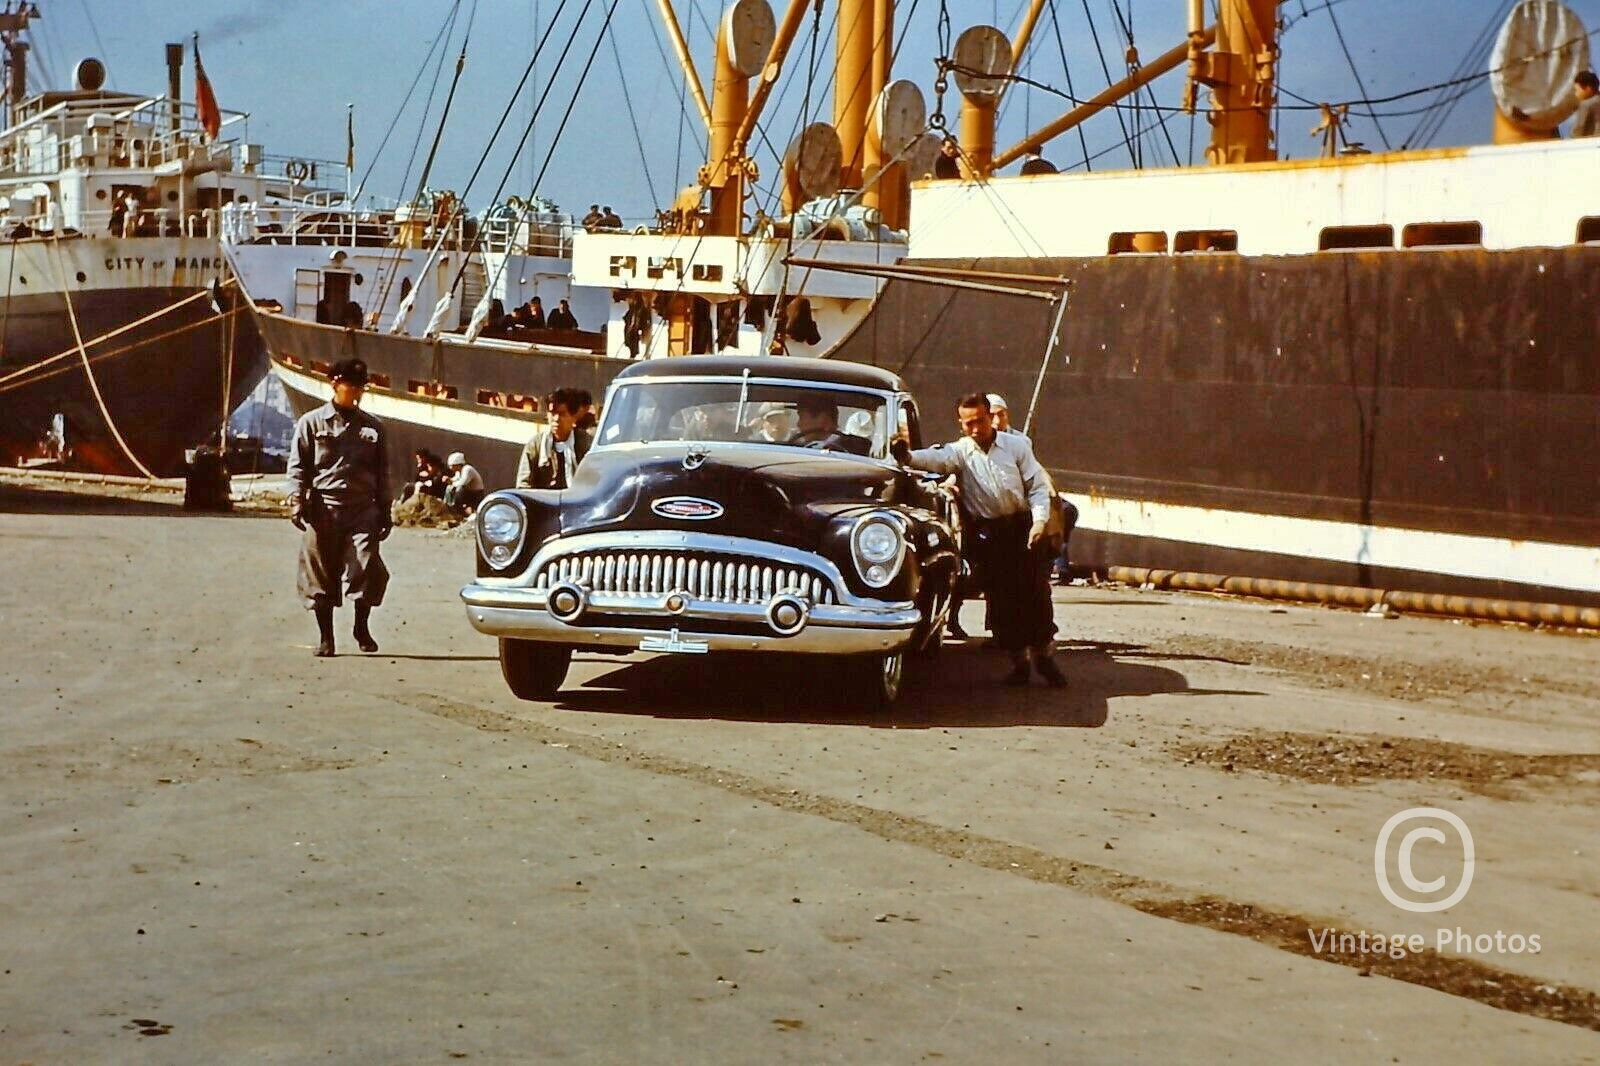 1950s Unloading Classic American automobile in Japanese Port